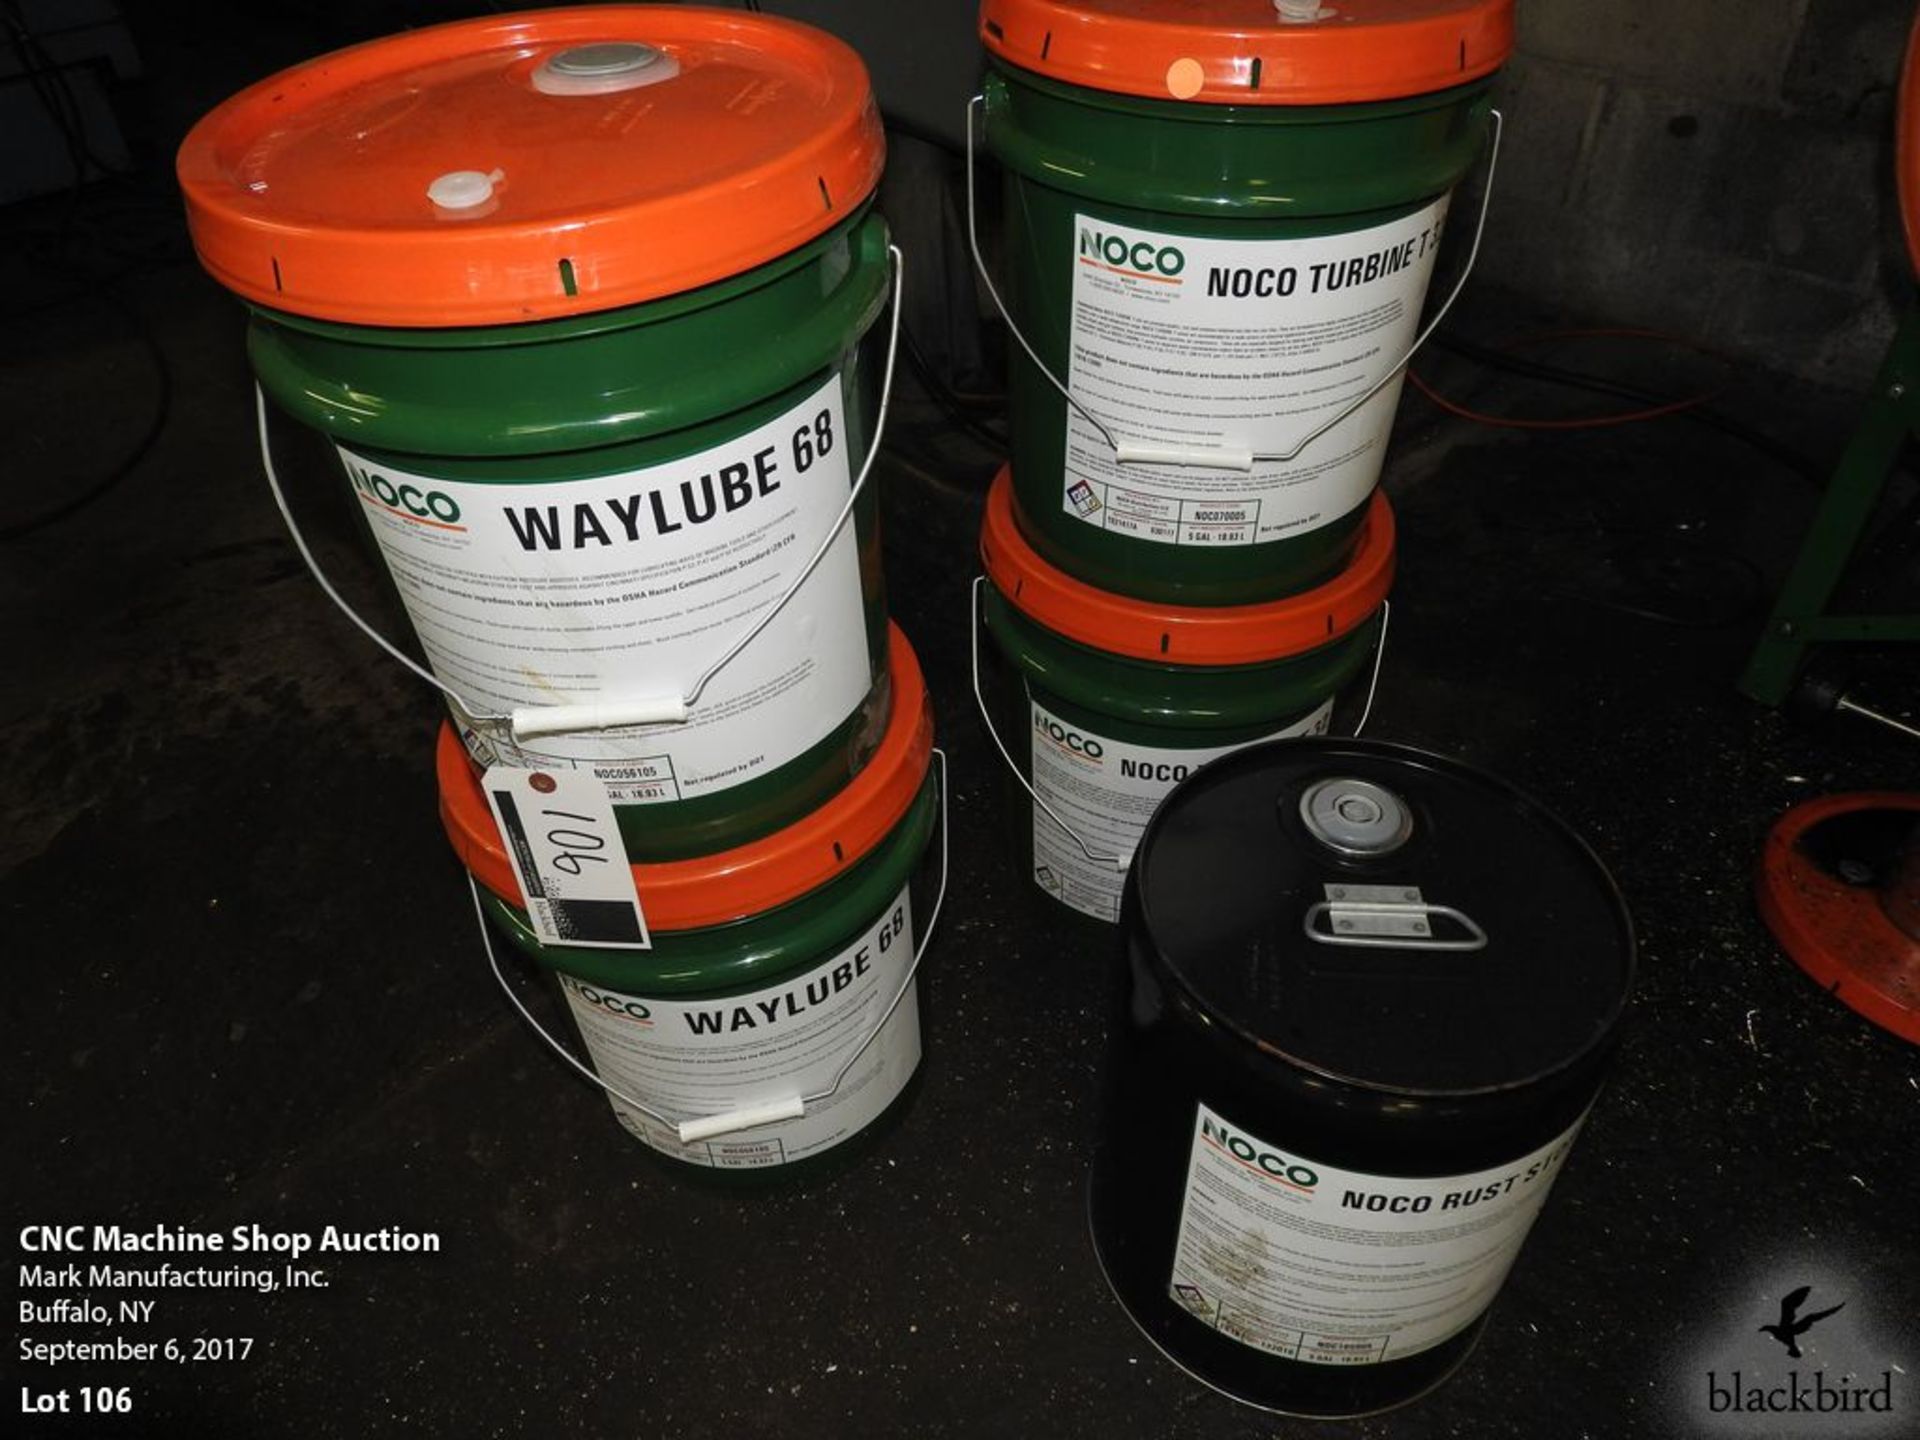 Lot- Sealed 5 gallon pails of NOCO (2) Waylube 68, (3) NOCO turbine T-32, and (1) NOCO rust stop